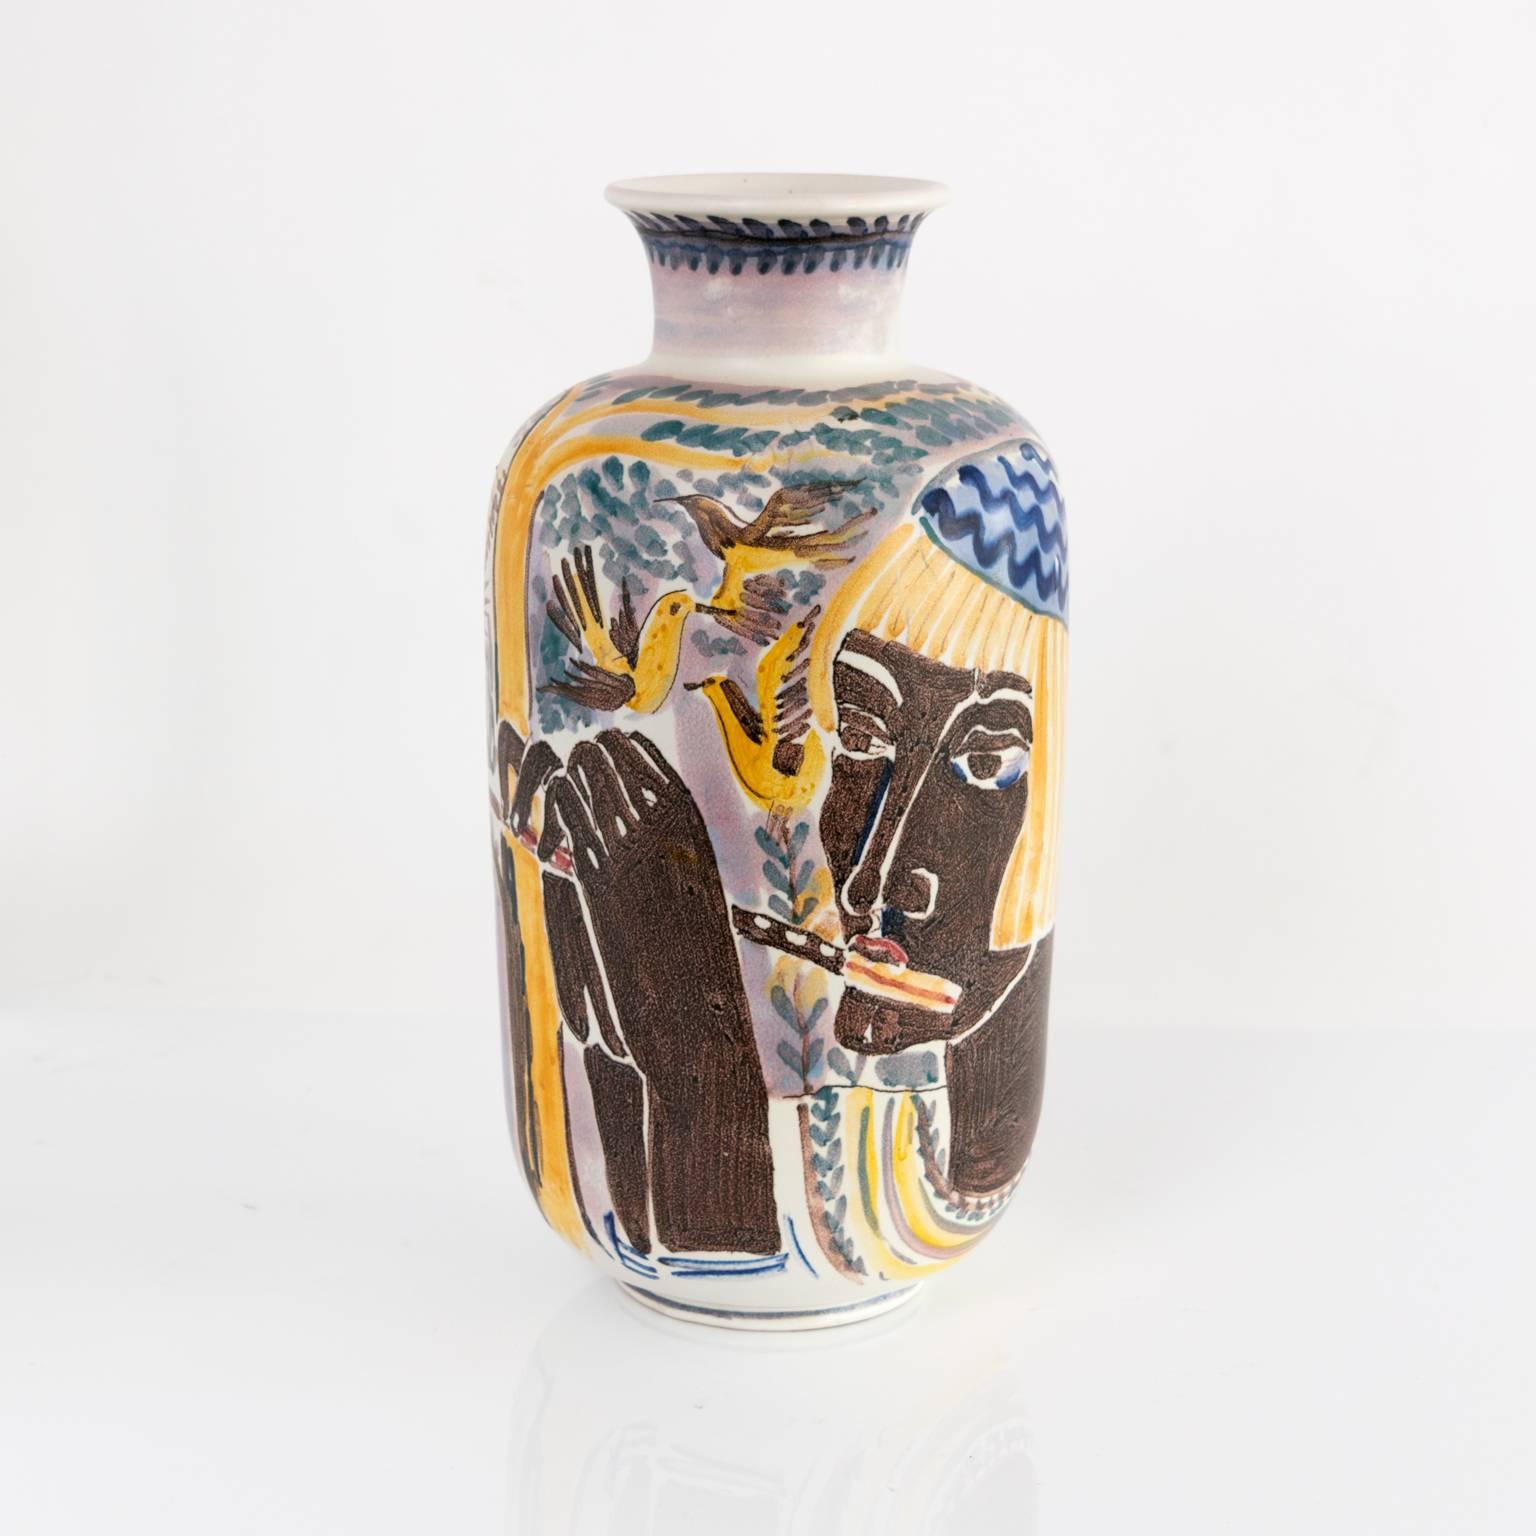 A large hand decorated ceramic vase by Carl-Harry Stalhane for Rörstrand. The vase depicts two women, one playing a flute or piccolo, the background has a tree, birds and lots of flowers. Signed on bottom made in 1944.

Measure: Height 16“ x